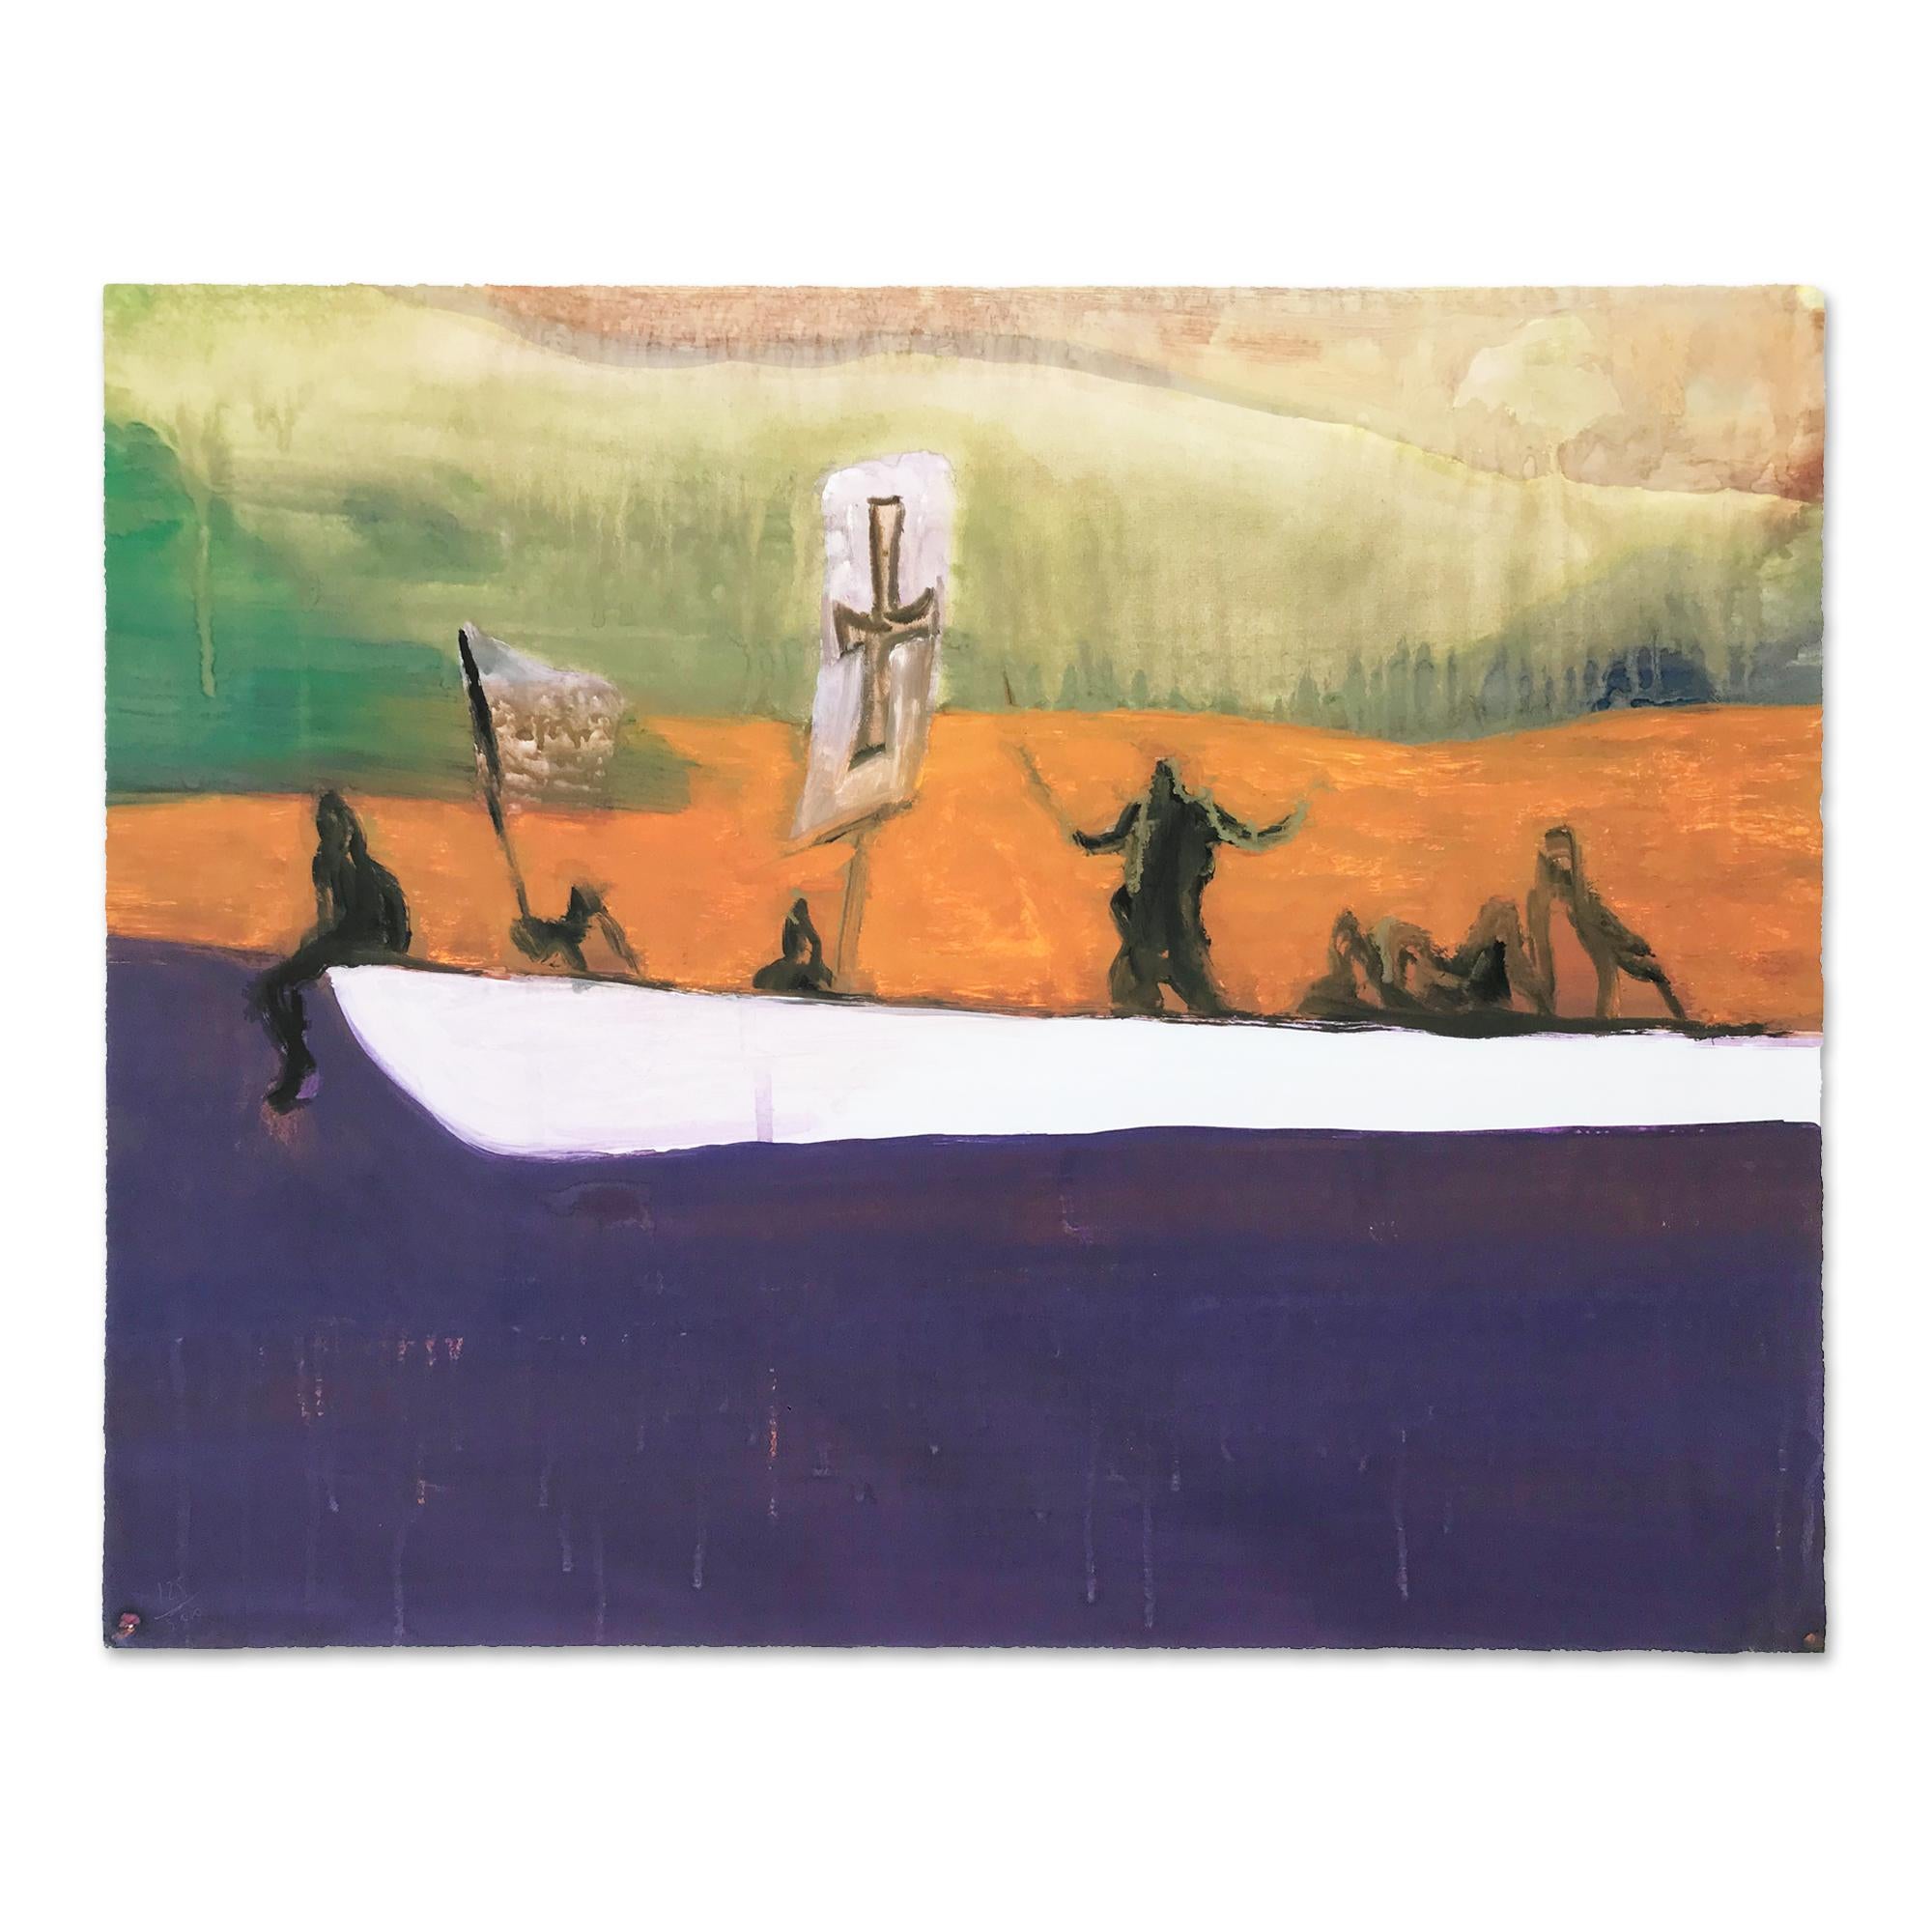 Peter Doig (born 1959 in Edinburgh)
Canoe, 2008
Medium: Aquatint on wove paper
Dimensions: 59 x 75 cm (23.23 x 29.33 in)
Edition of 500: Hand signed and numbered on recto
Condition: Excellent

“I think painting should evolve itself into a type of